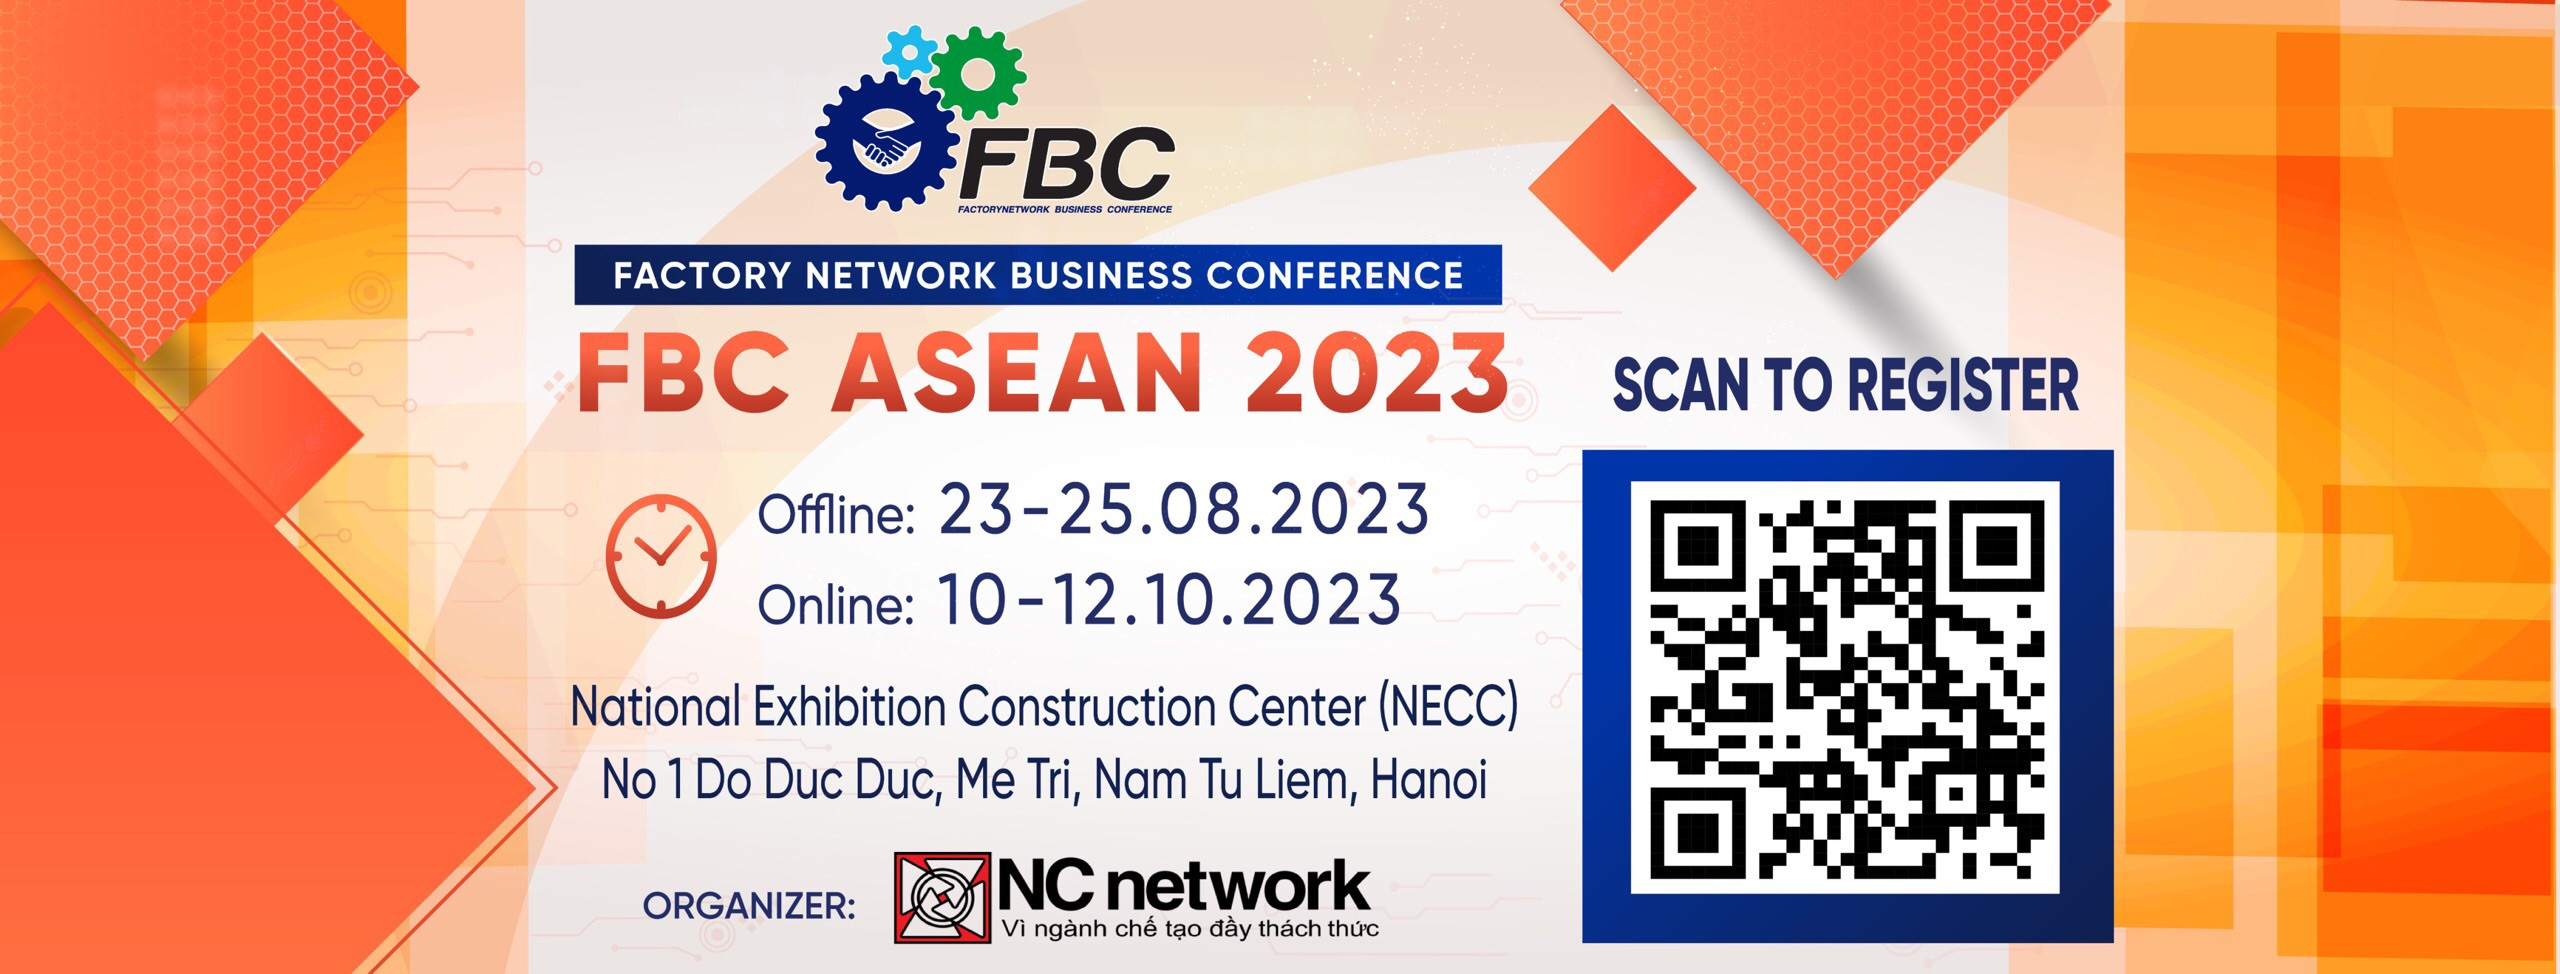 Factory Network Business Conference ASEAN 2023 - Exhibitors List (12)